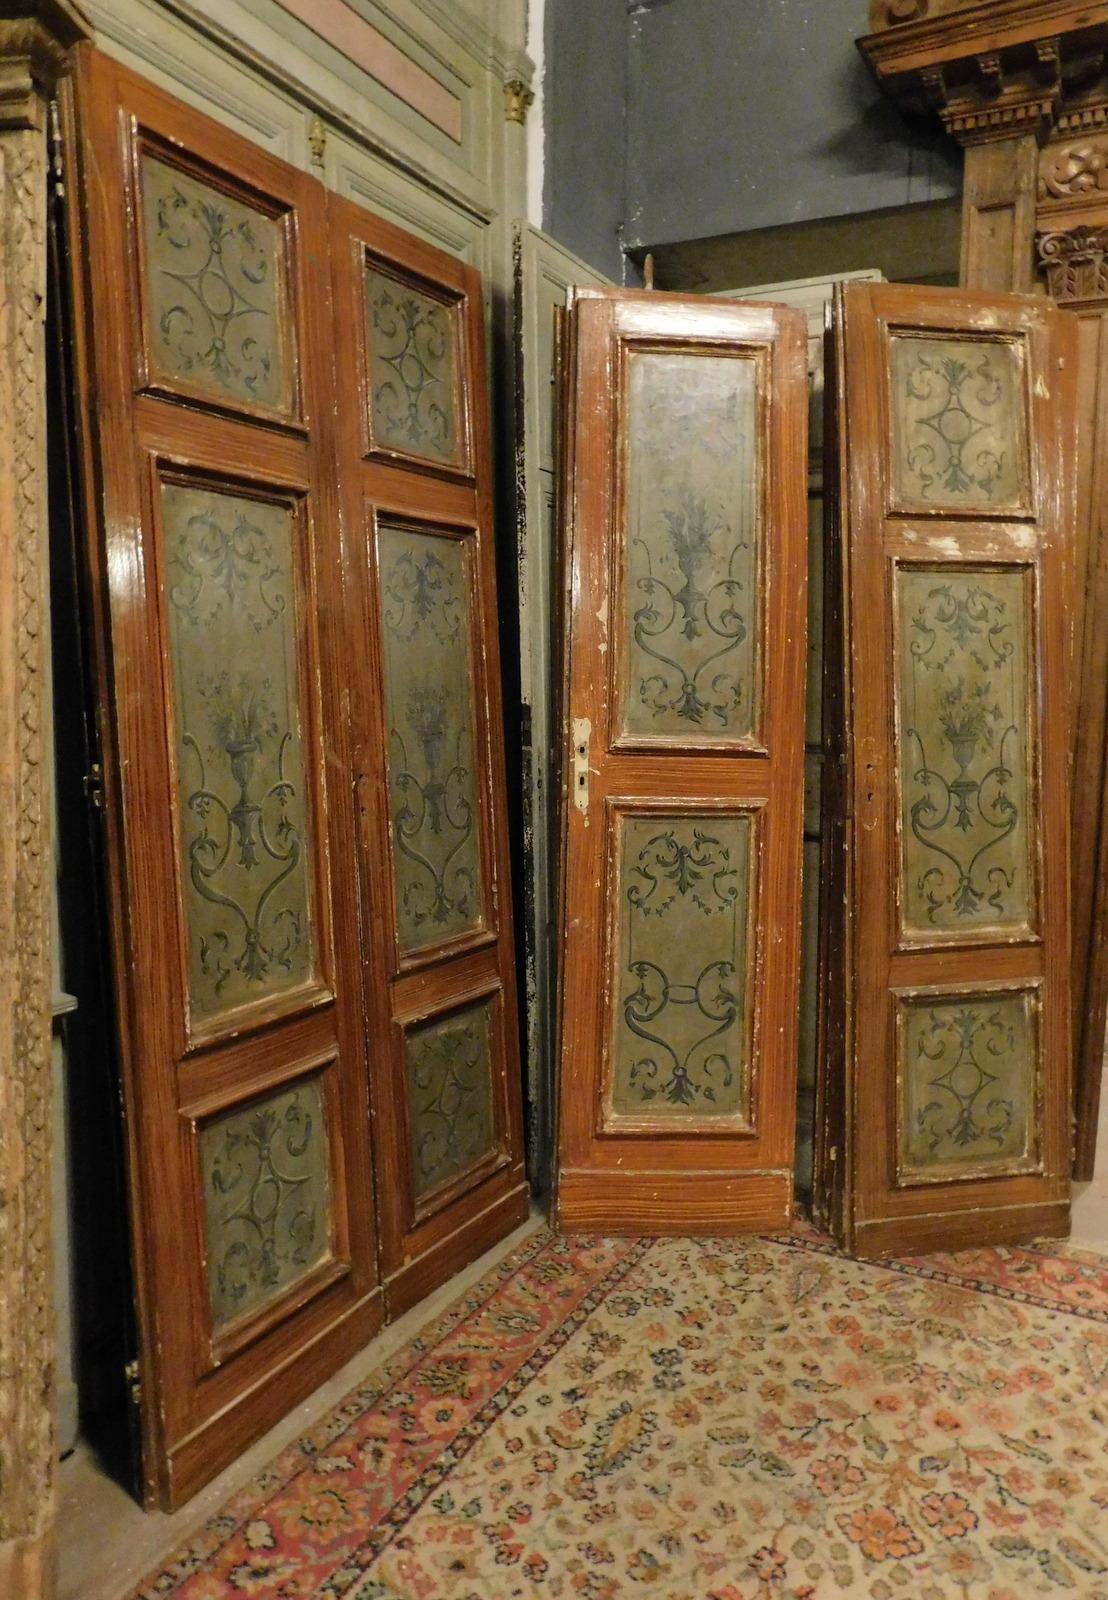 n. 6 antique double doors, double-wing lacquered in wood and painted with a motif of the time in shades of blue, also finished on the back, built entirely by hand in the 19th century in Italy.
Beautiful in set, in case you want to use all the doors